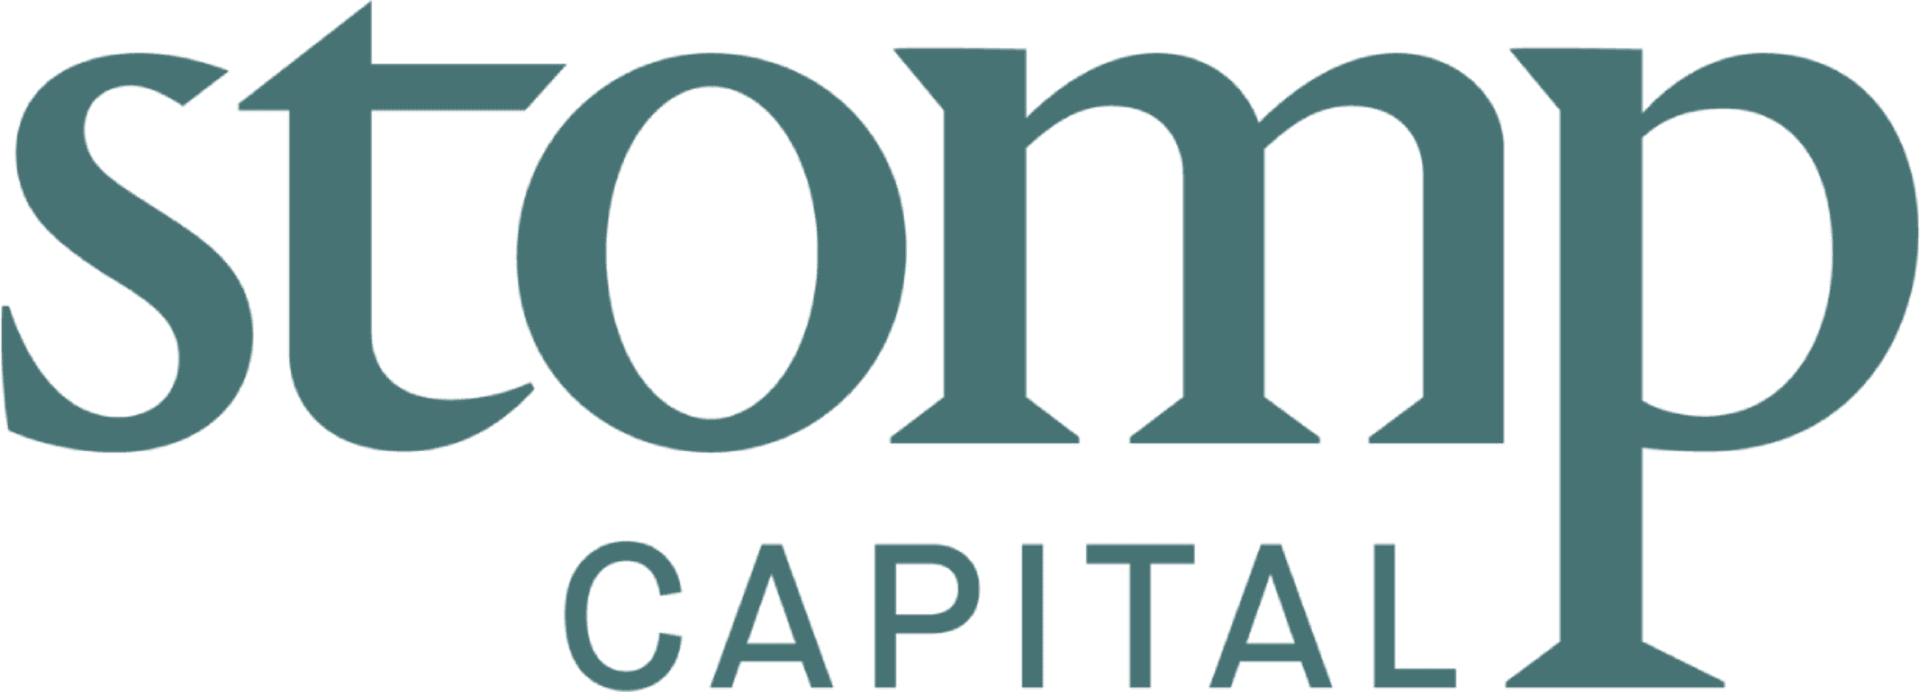 Stomp Capital Next Gen Hospitality Private Equity